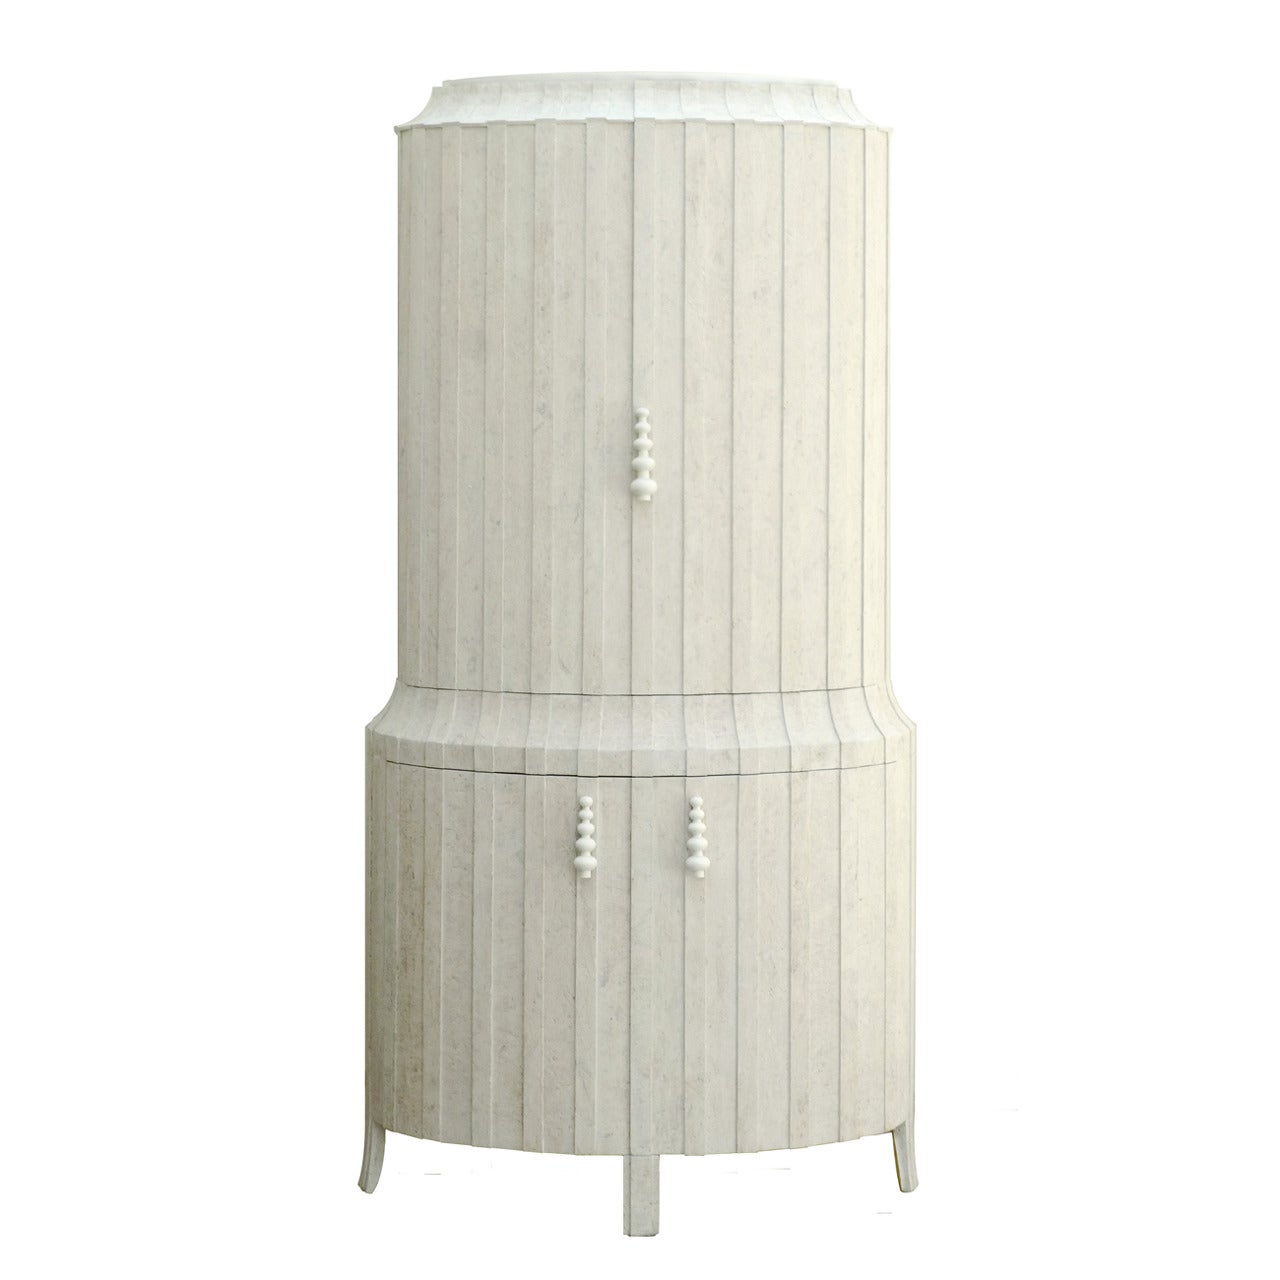 "Fujiyama" Standing Cabinet by Patrick Schols For Sale